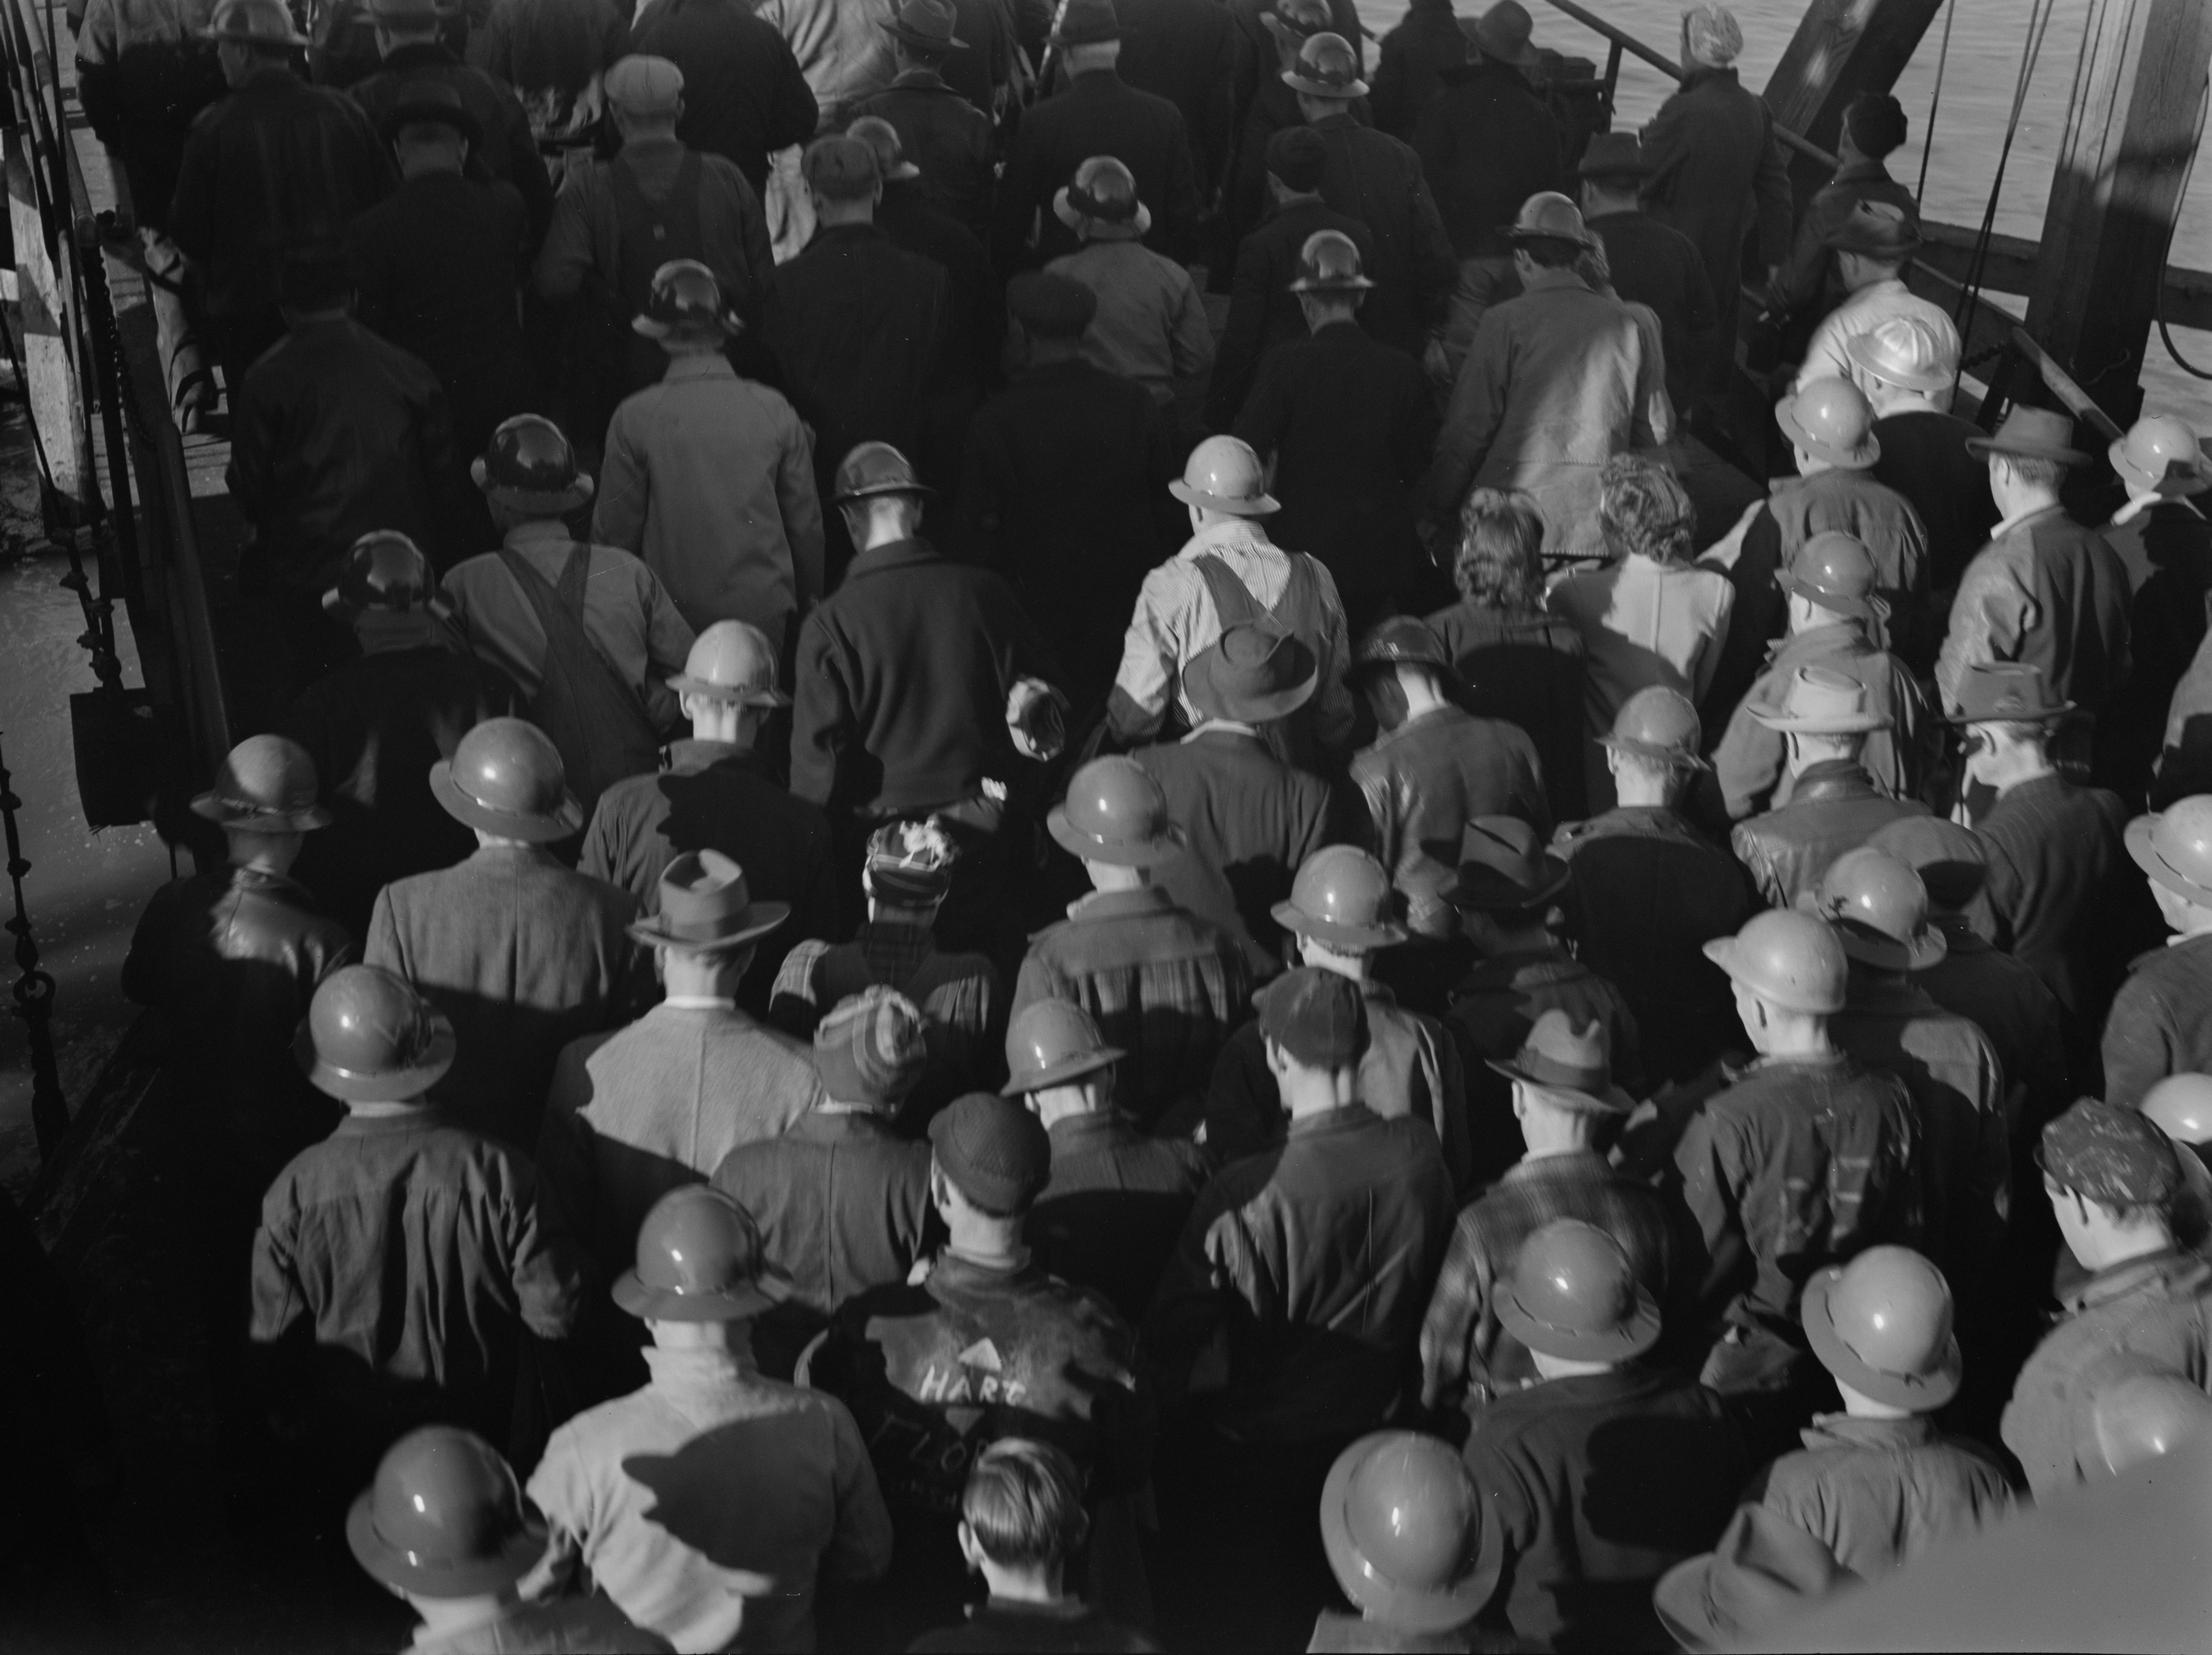 Shipyard workers arriving at the Kaiser Richmond Shipyards by ferry, Richmond, California, United States, Feb 1943